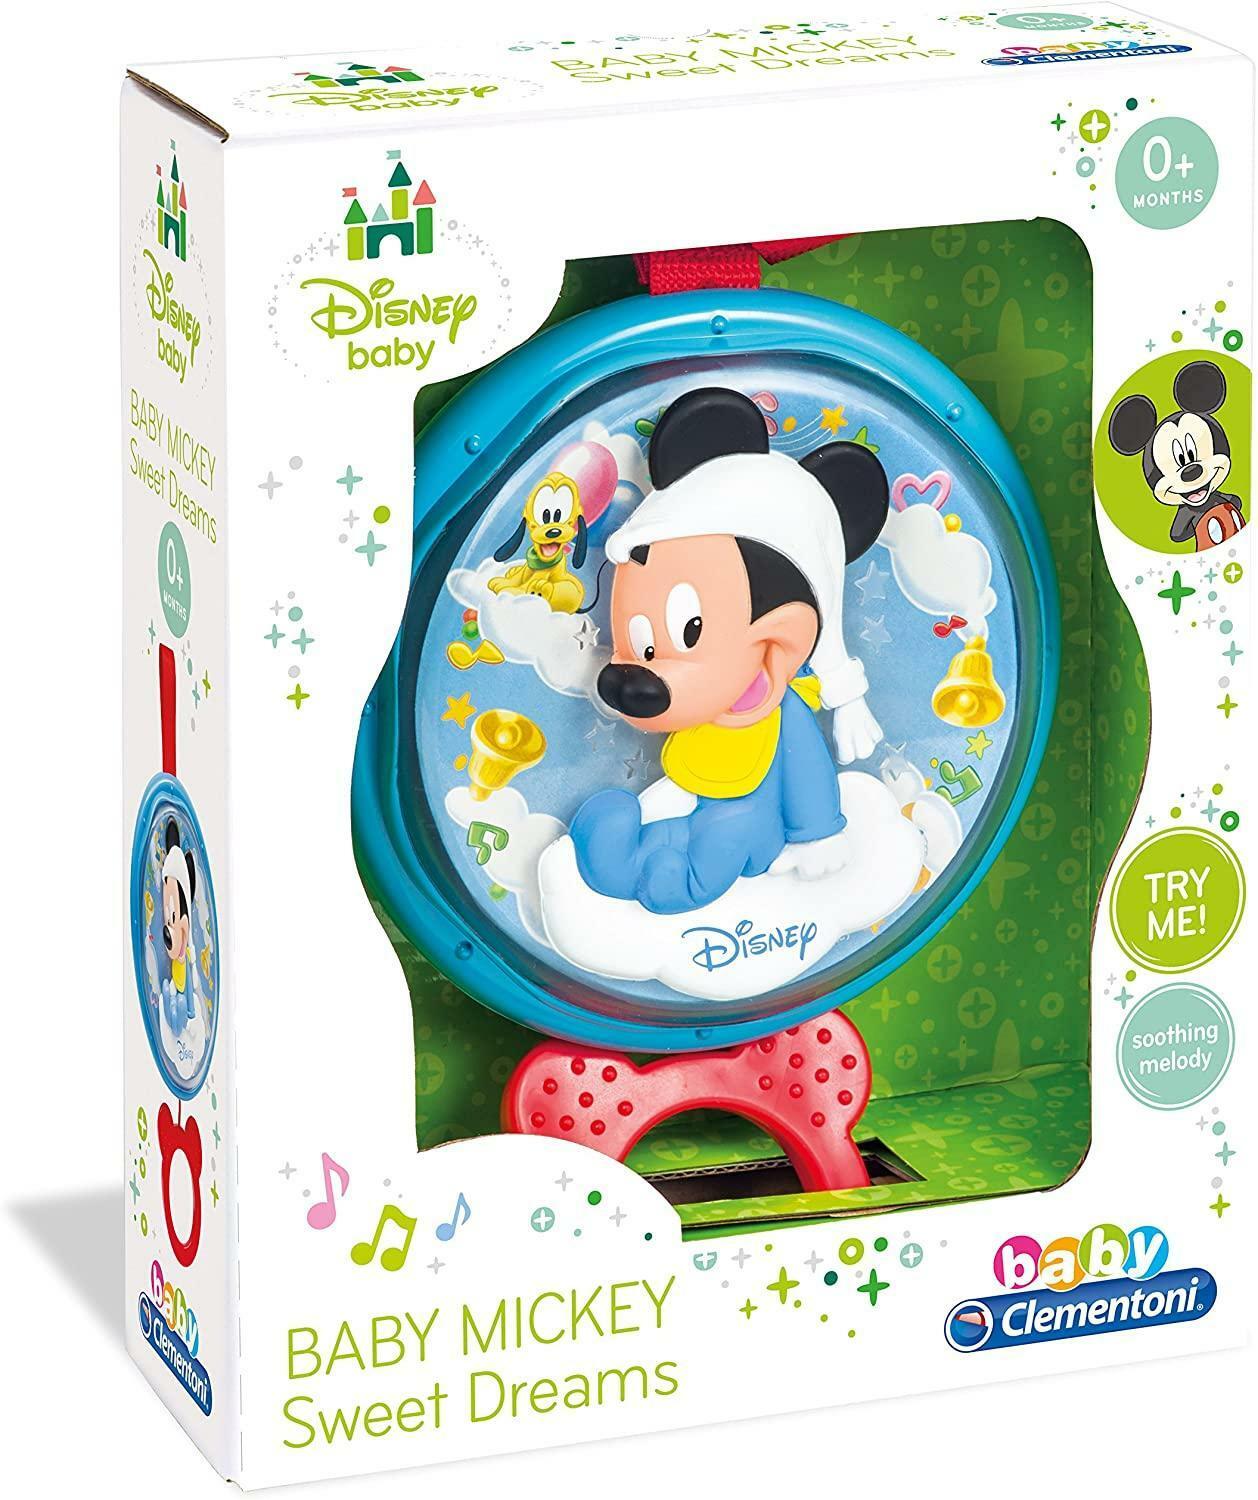 clementoni baby mickey carillon dolce notte 14650